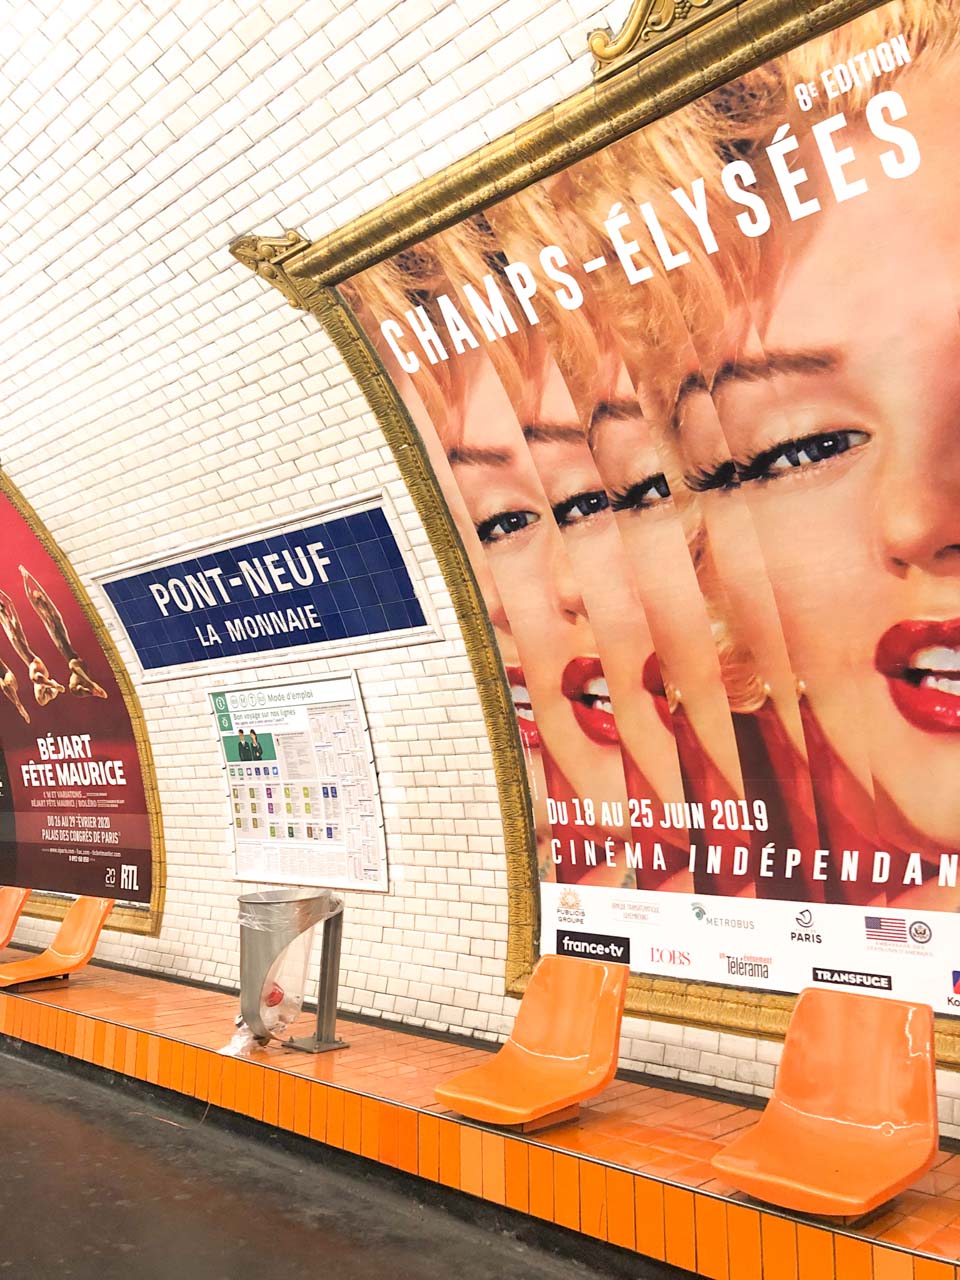 Billboards at the Pont-Neuf La Monnaie metro station in Paris including one featuring Marilyn Monroe